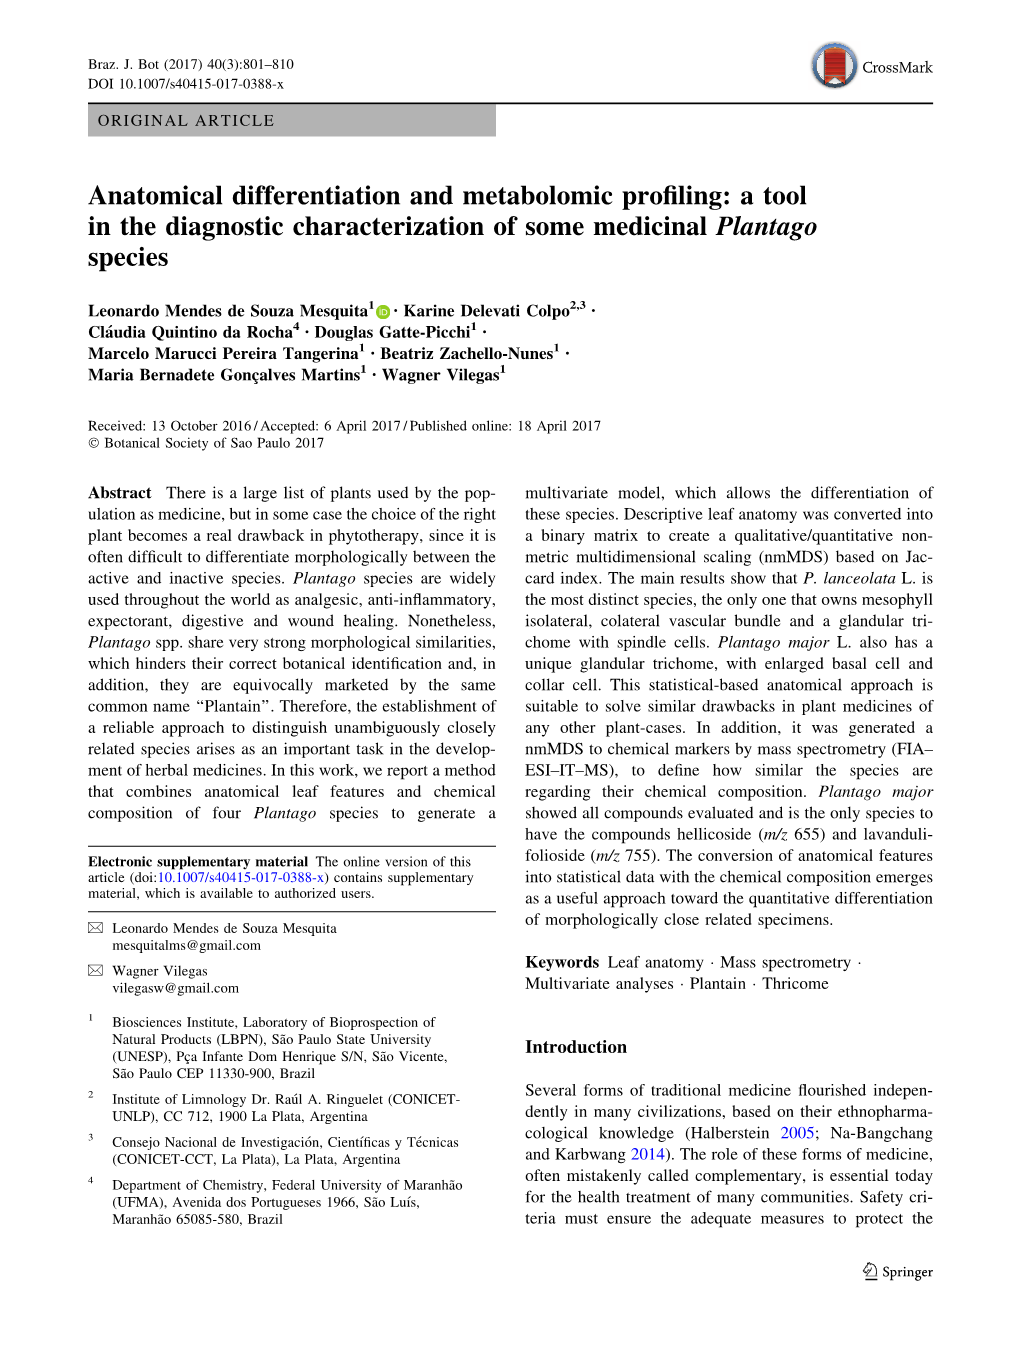 Anatomical Differentiation and Metabolomic Profiling